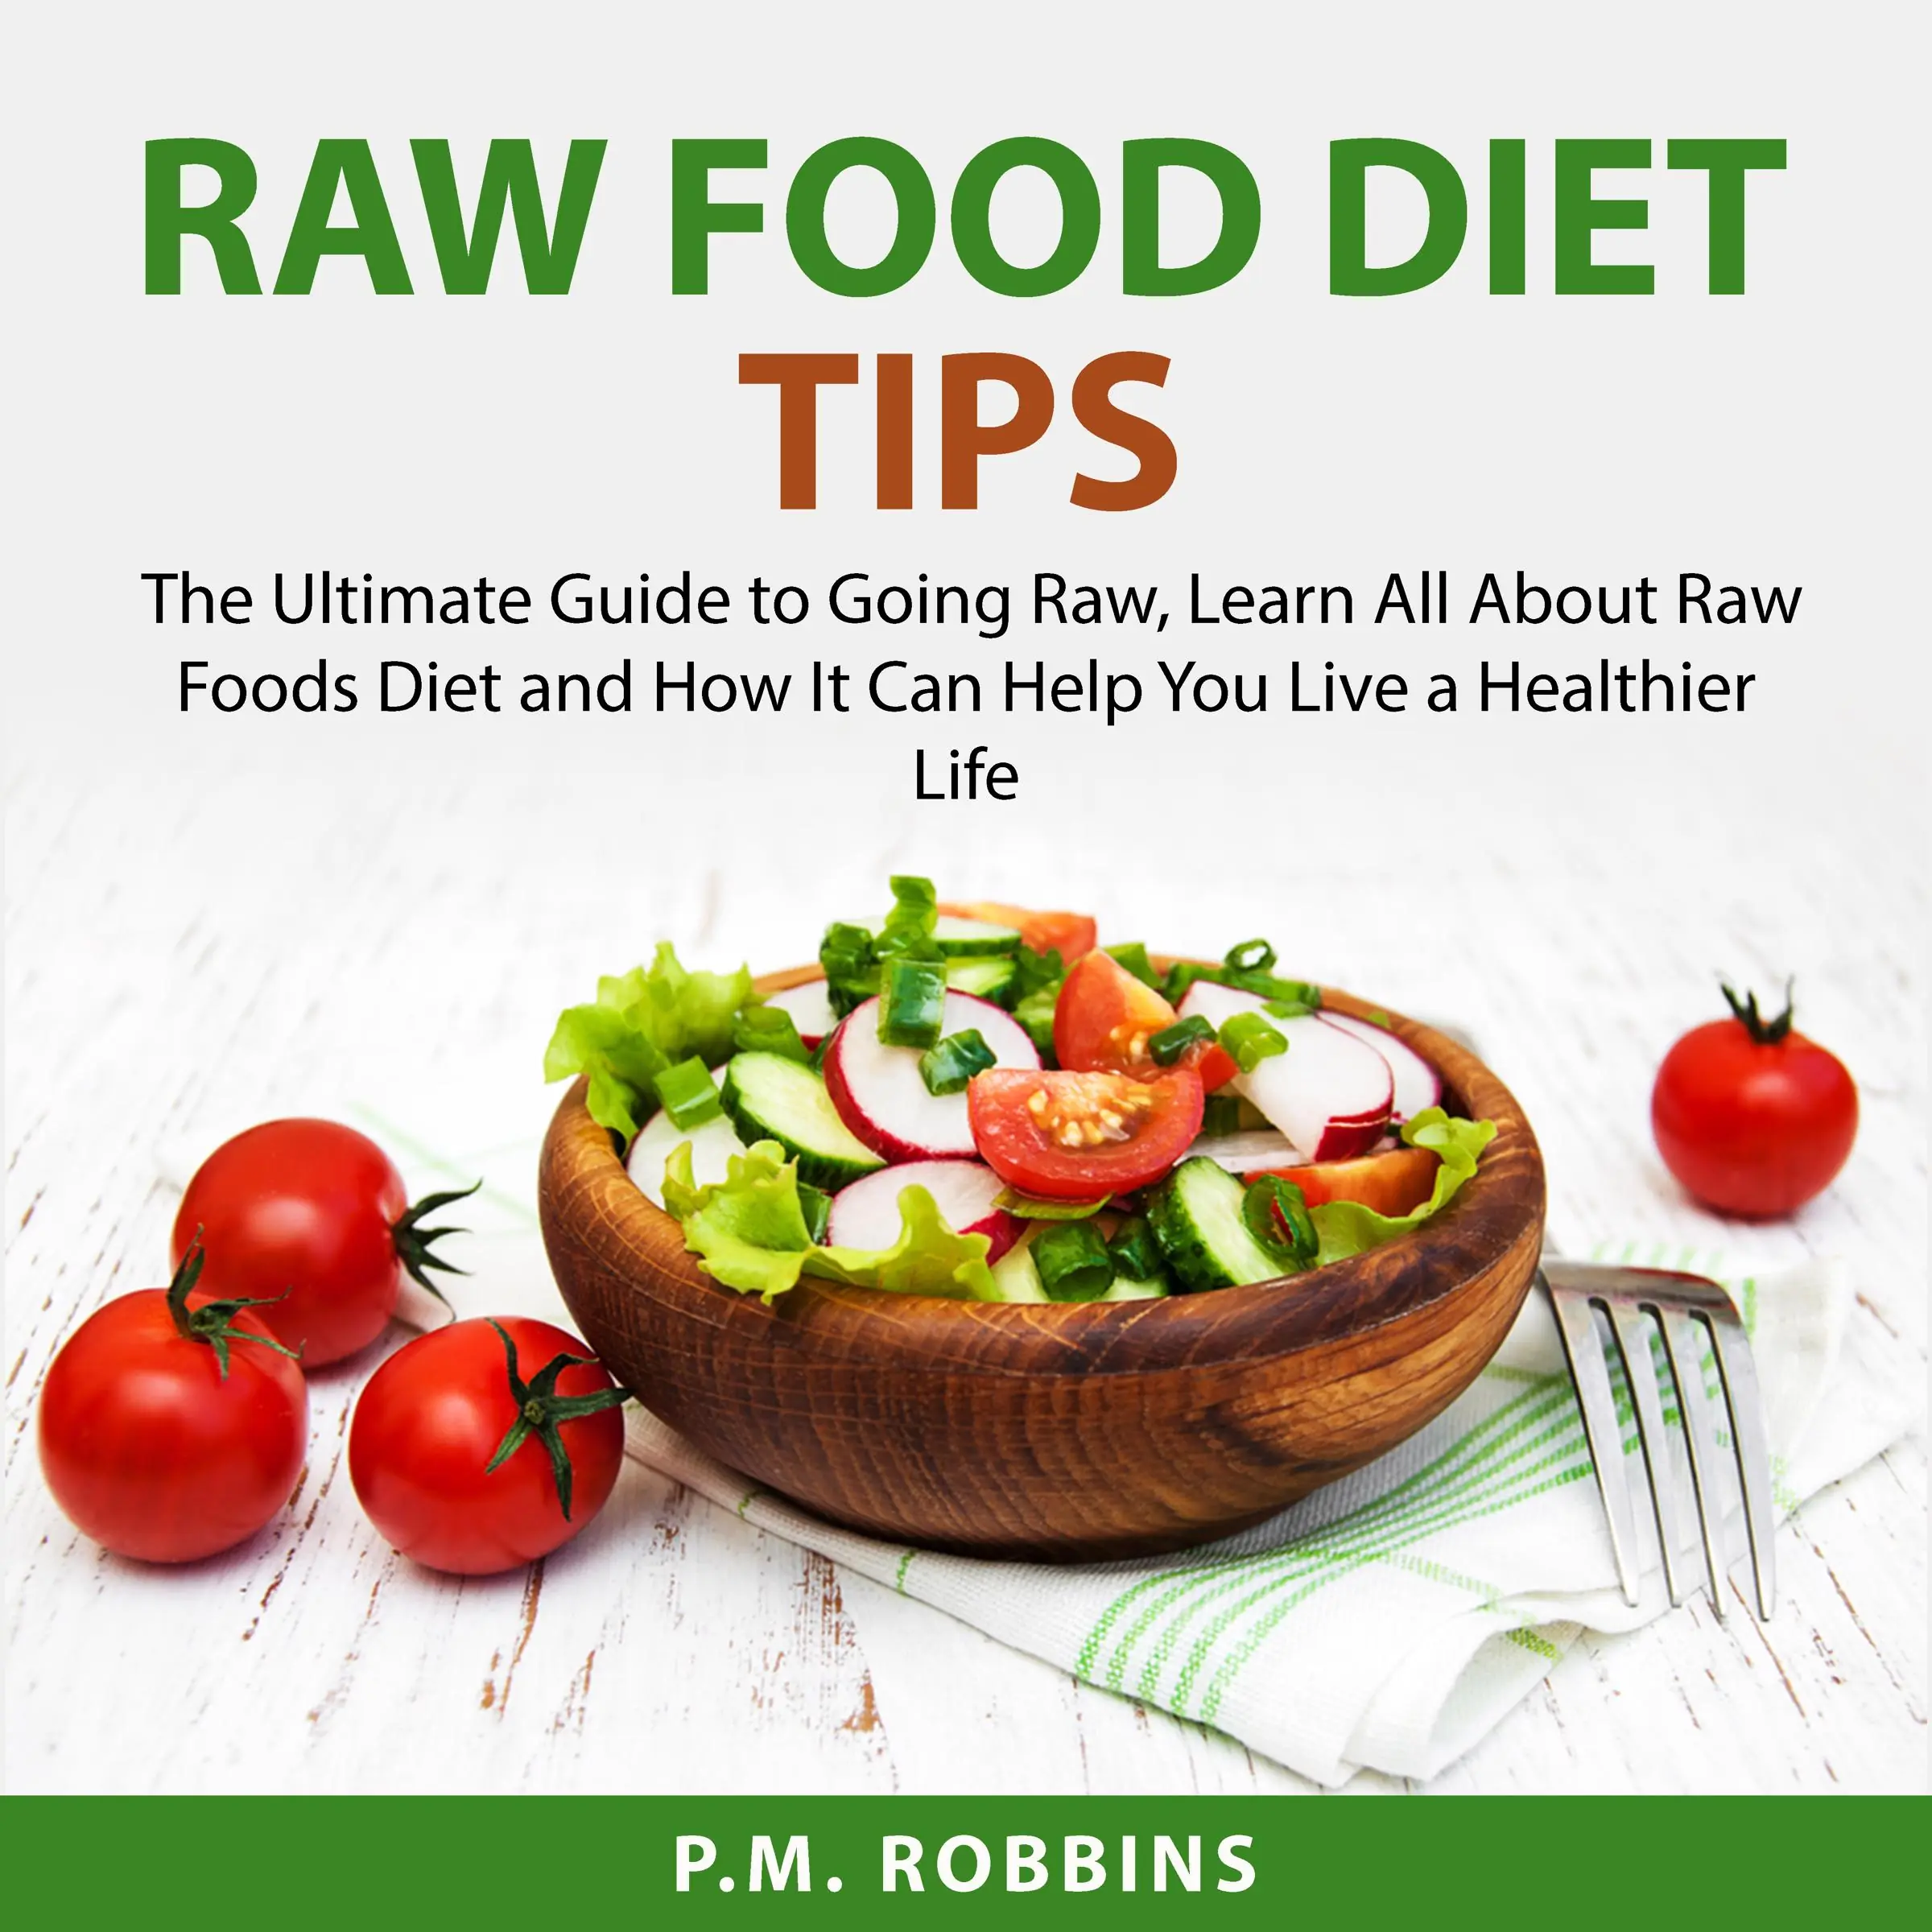 Raw Food Diet Tips: The Ultimate Guide to Going Raw, Learn All About Raw Foods Diet and How It Can Help You Live a Healthier Life Audiobook by P.M. Robbins